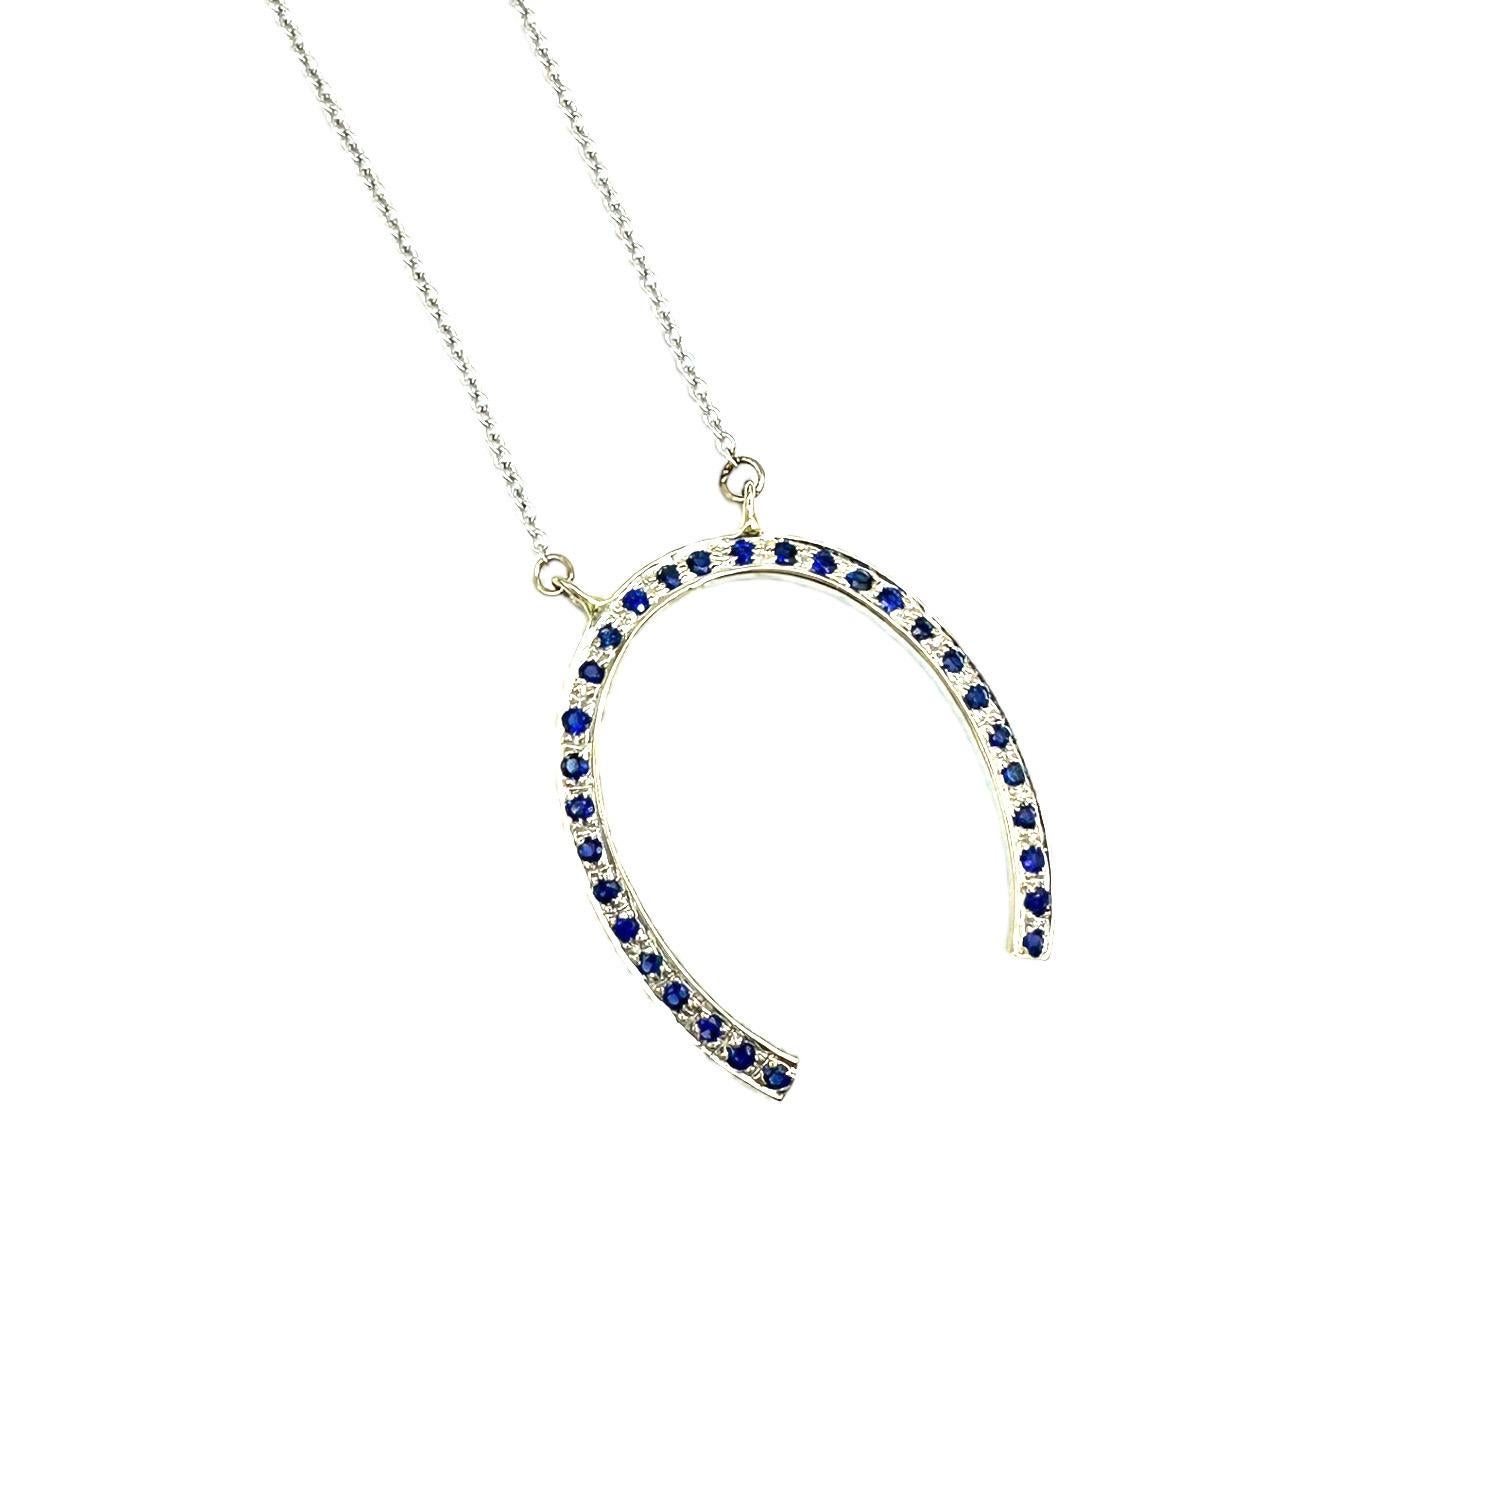 14 Karat white gold horseshoe necklace consists of blue sapphires. The sapphires are pave set in a 1-inch diameter pendant and attached to a 18